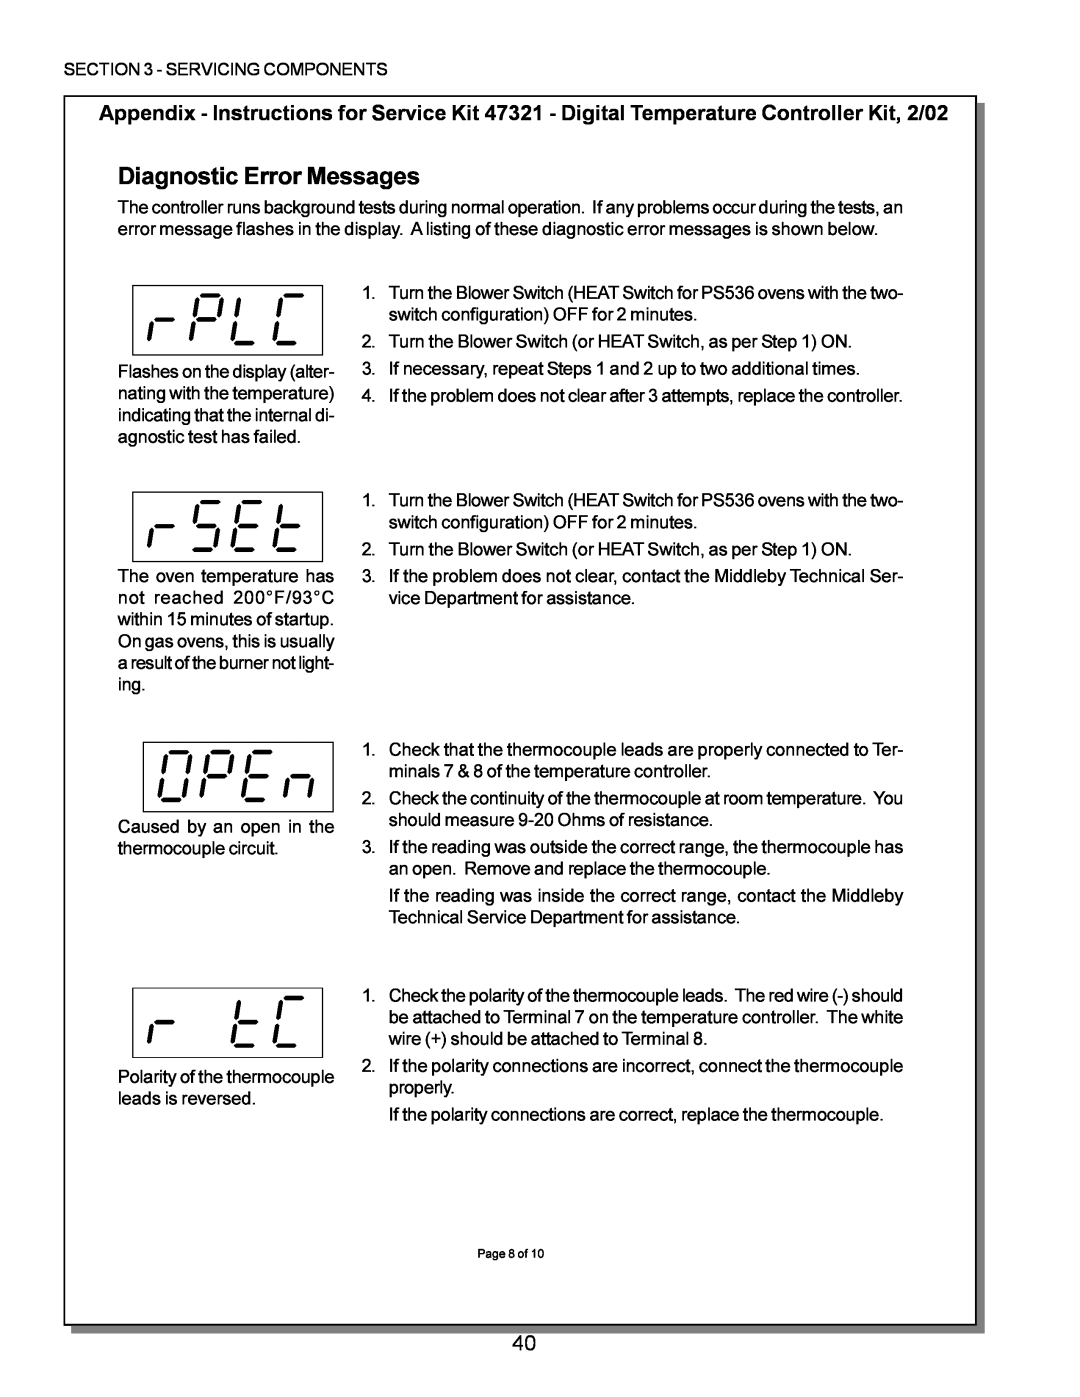 Middleby Marshall PS224 PS310, PS570, PS360, PS200, PS555, PS220 manual Diagnostic Error Messages, Page 8 of 